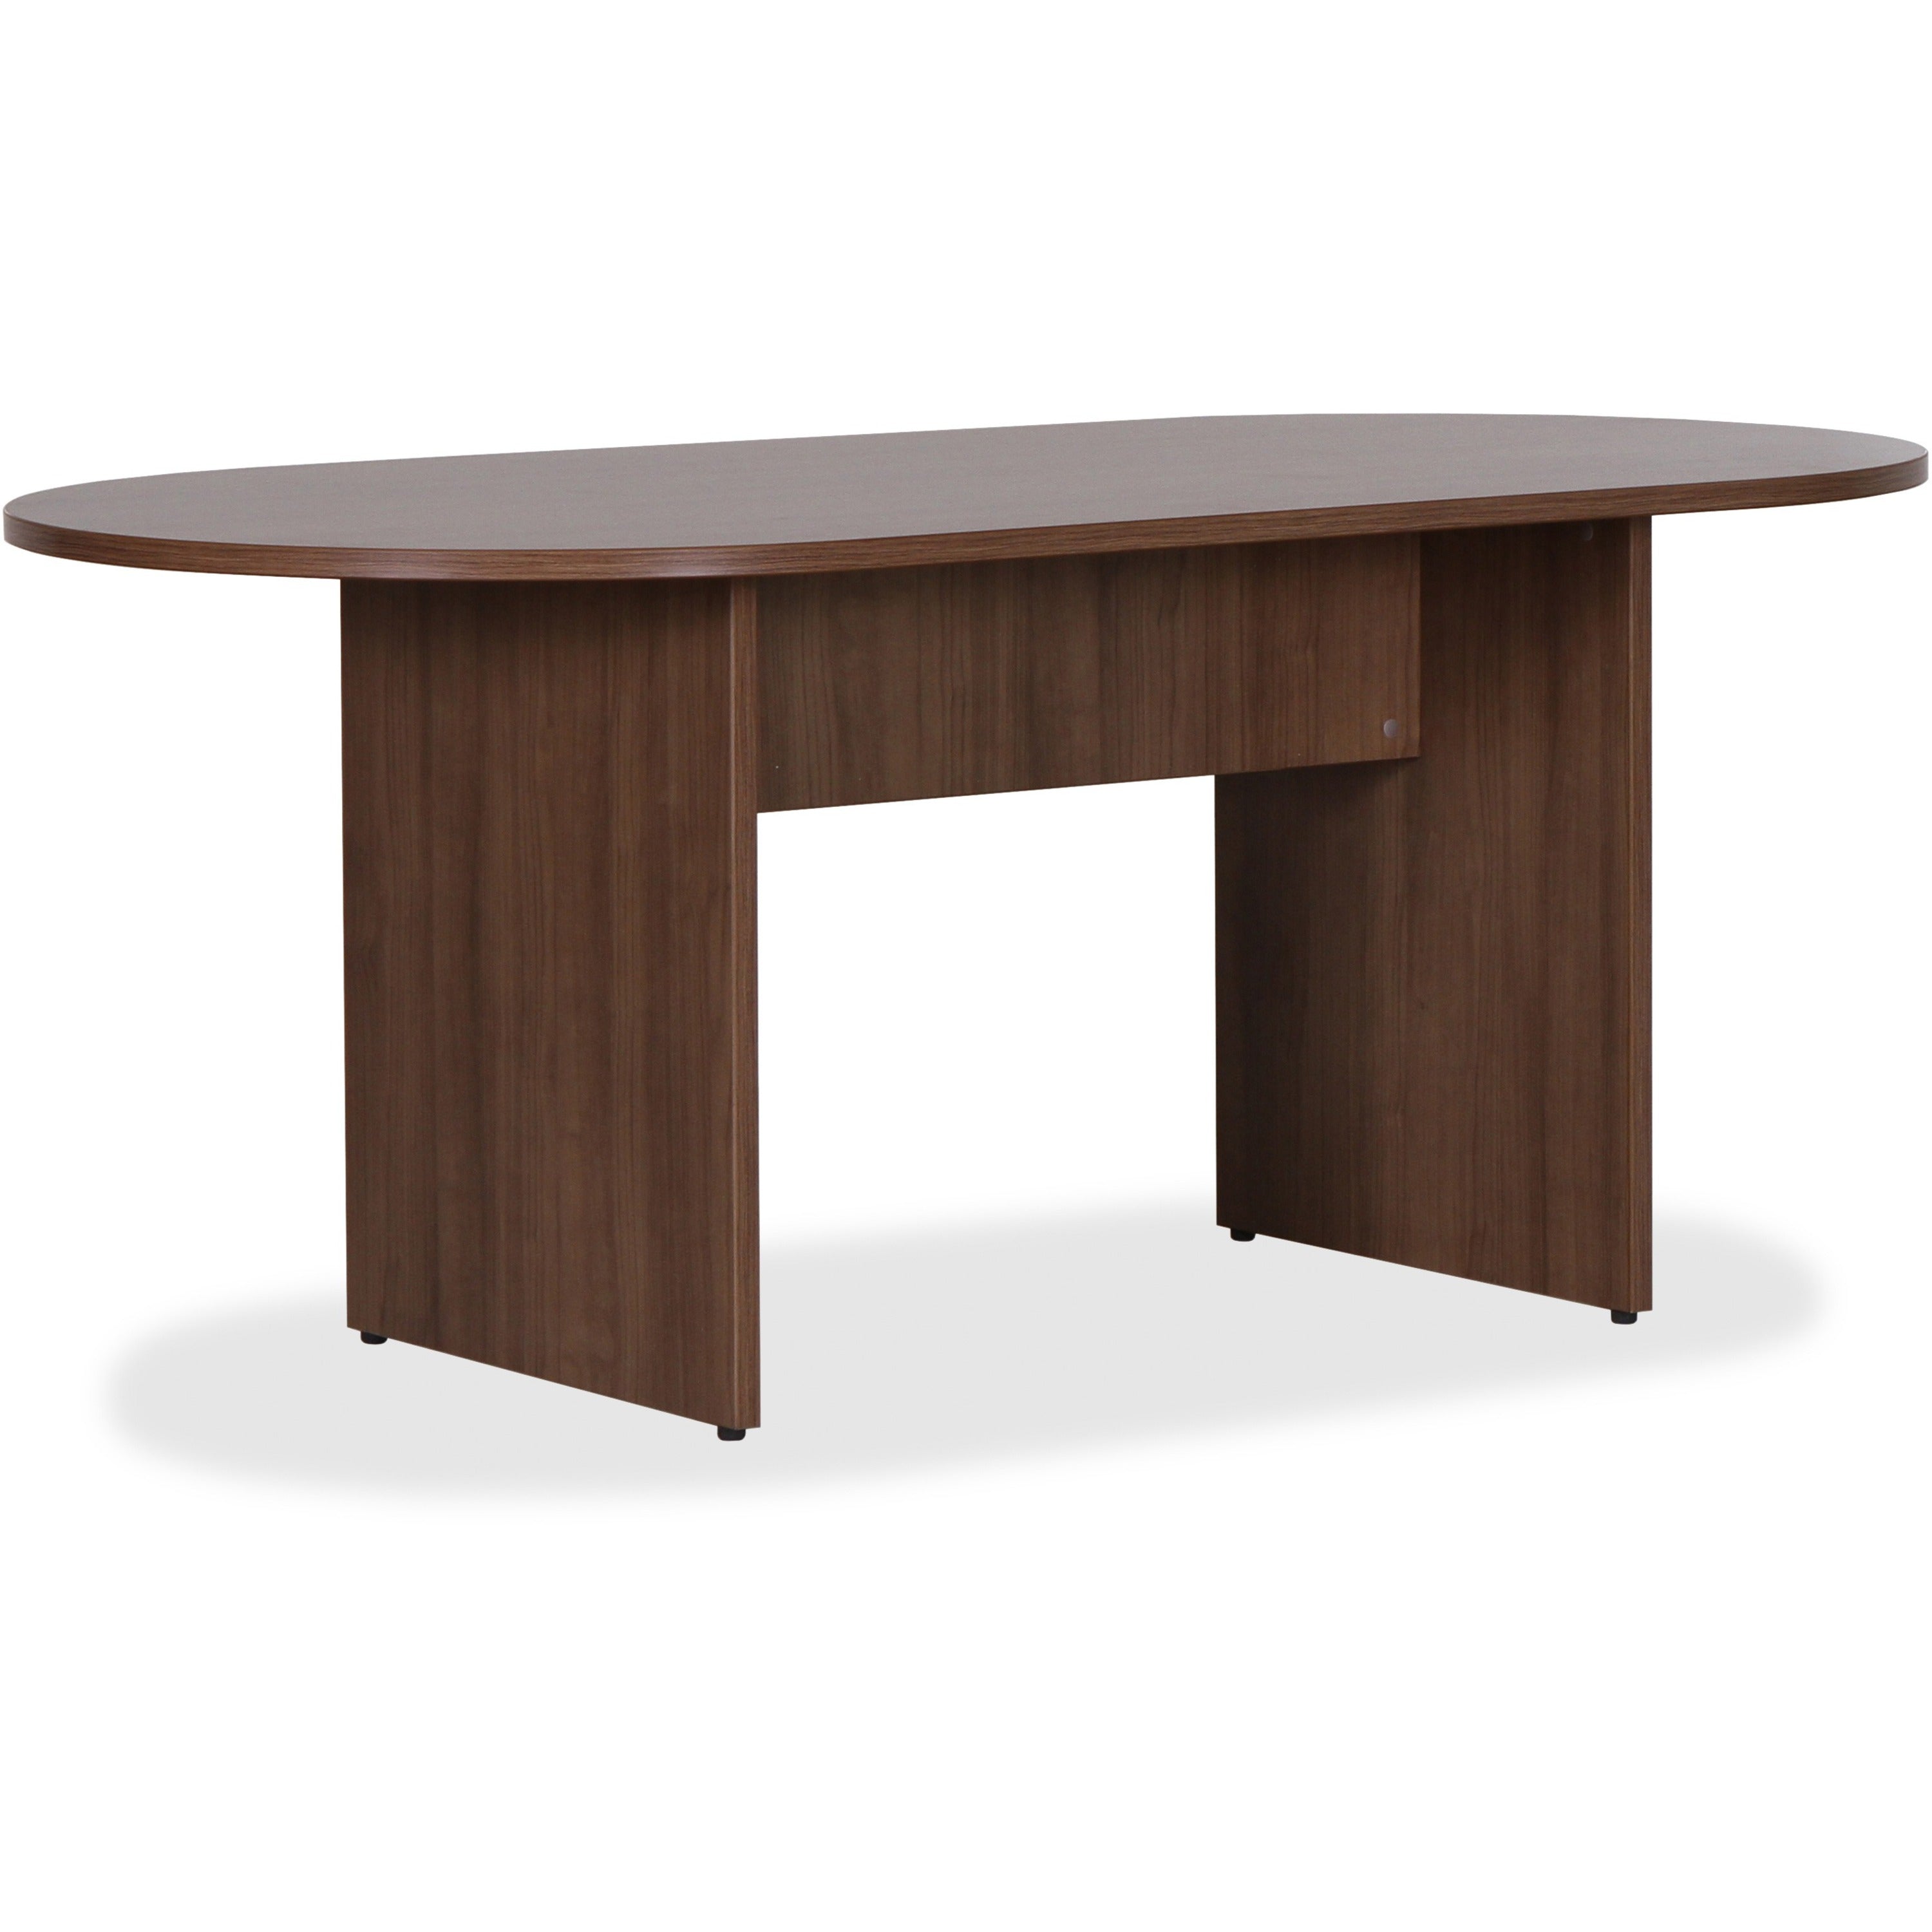 Lorell Essentials Oval Conference Table - 1.3" Table Top, 0" Edge, 70.9" x 35.4"29.5" Table - Finish: Walnut Laminate - Adjustable Foot Glide - 